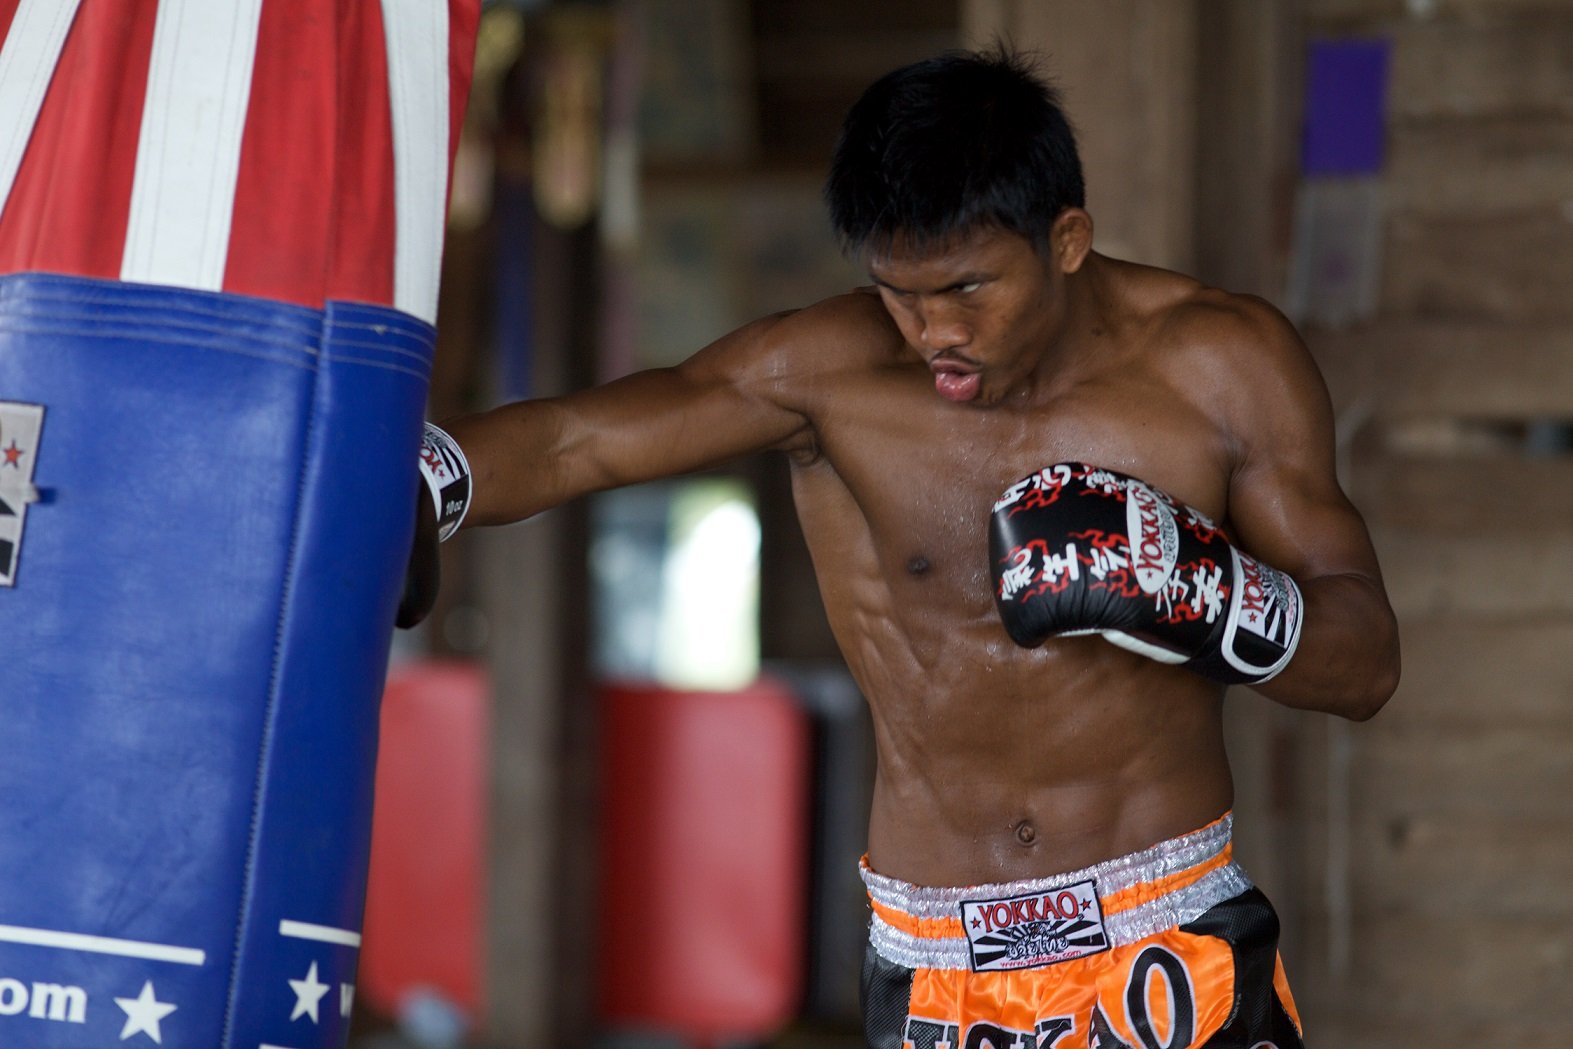 Muay Thai: the Martial Art that We All Know and Love